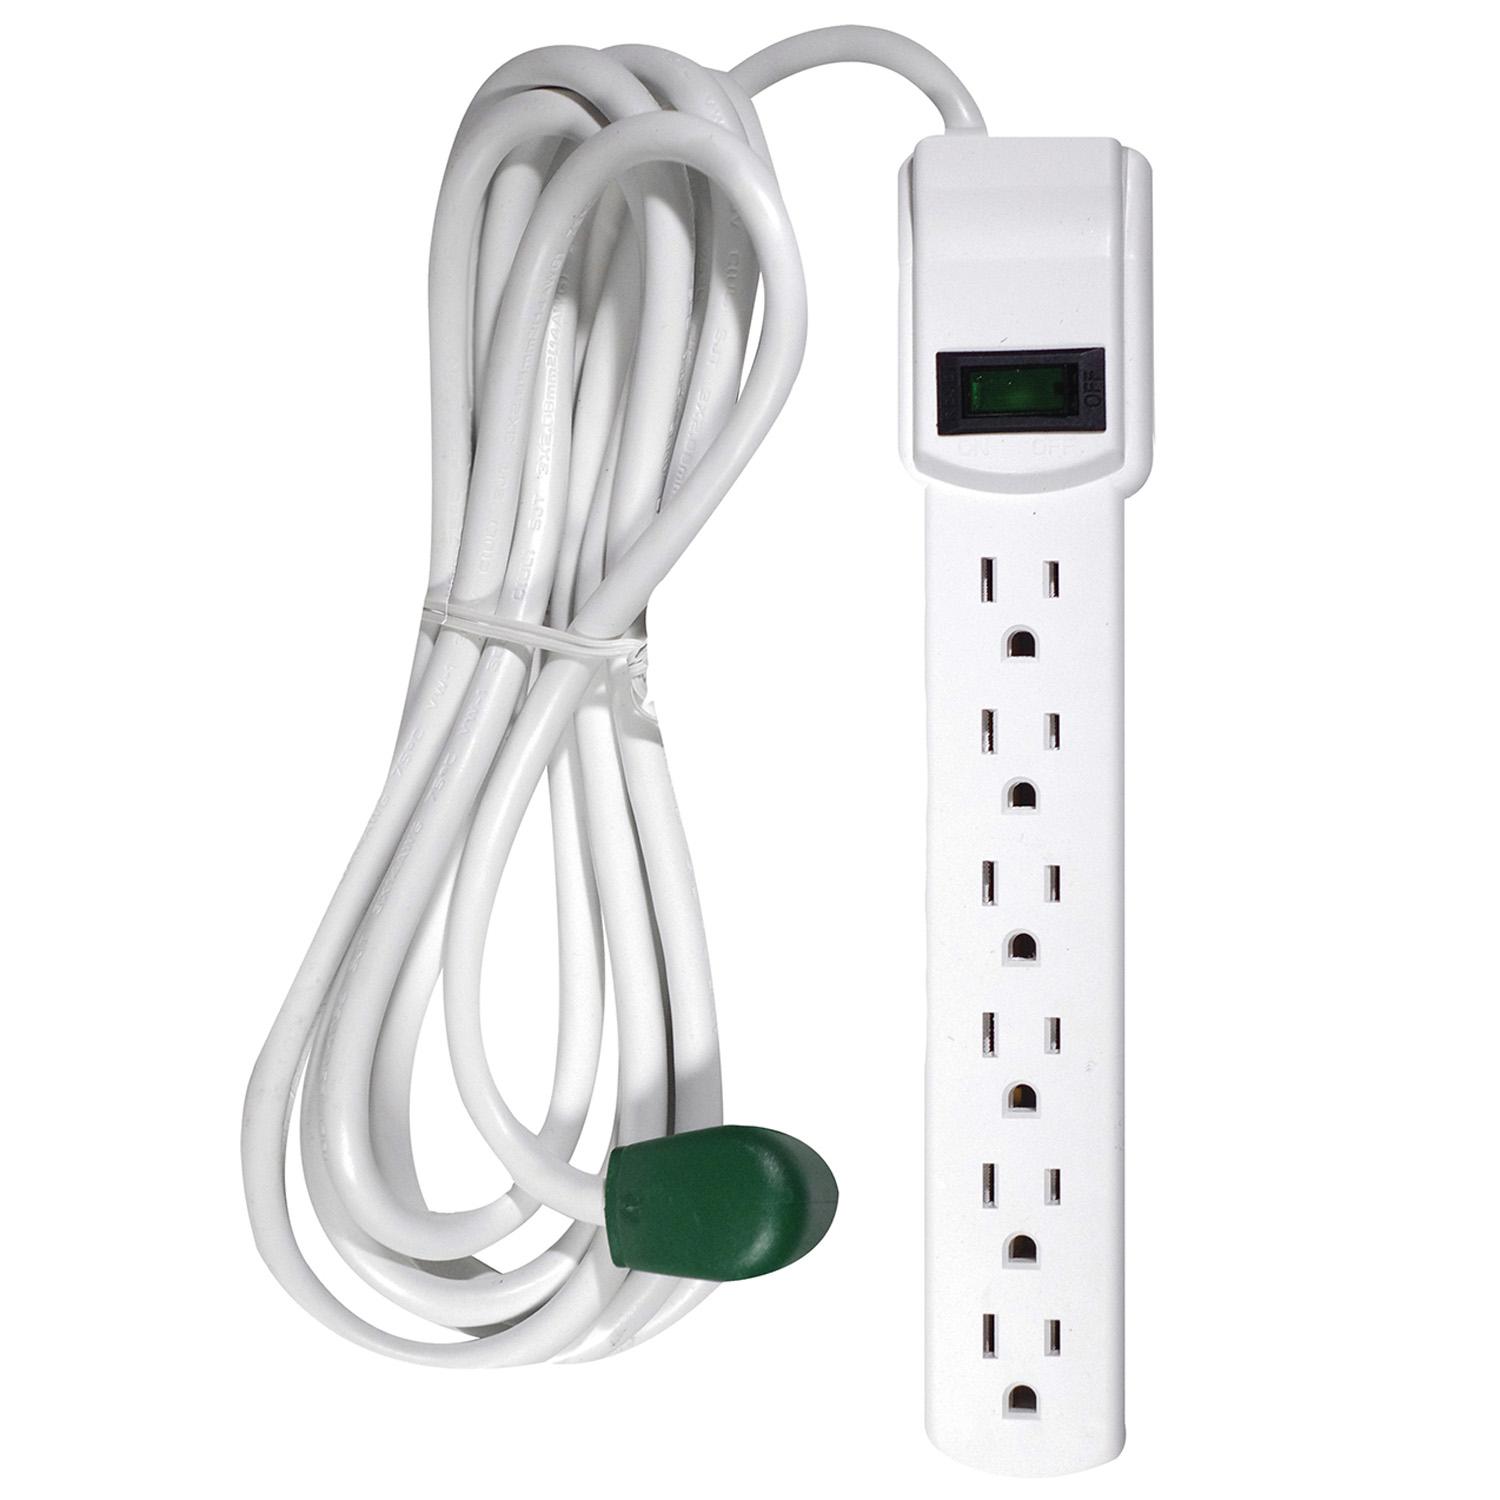 GoGreen Power 12ft 6-Outlet Surge Protector for $5.42